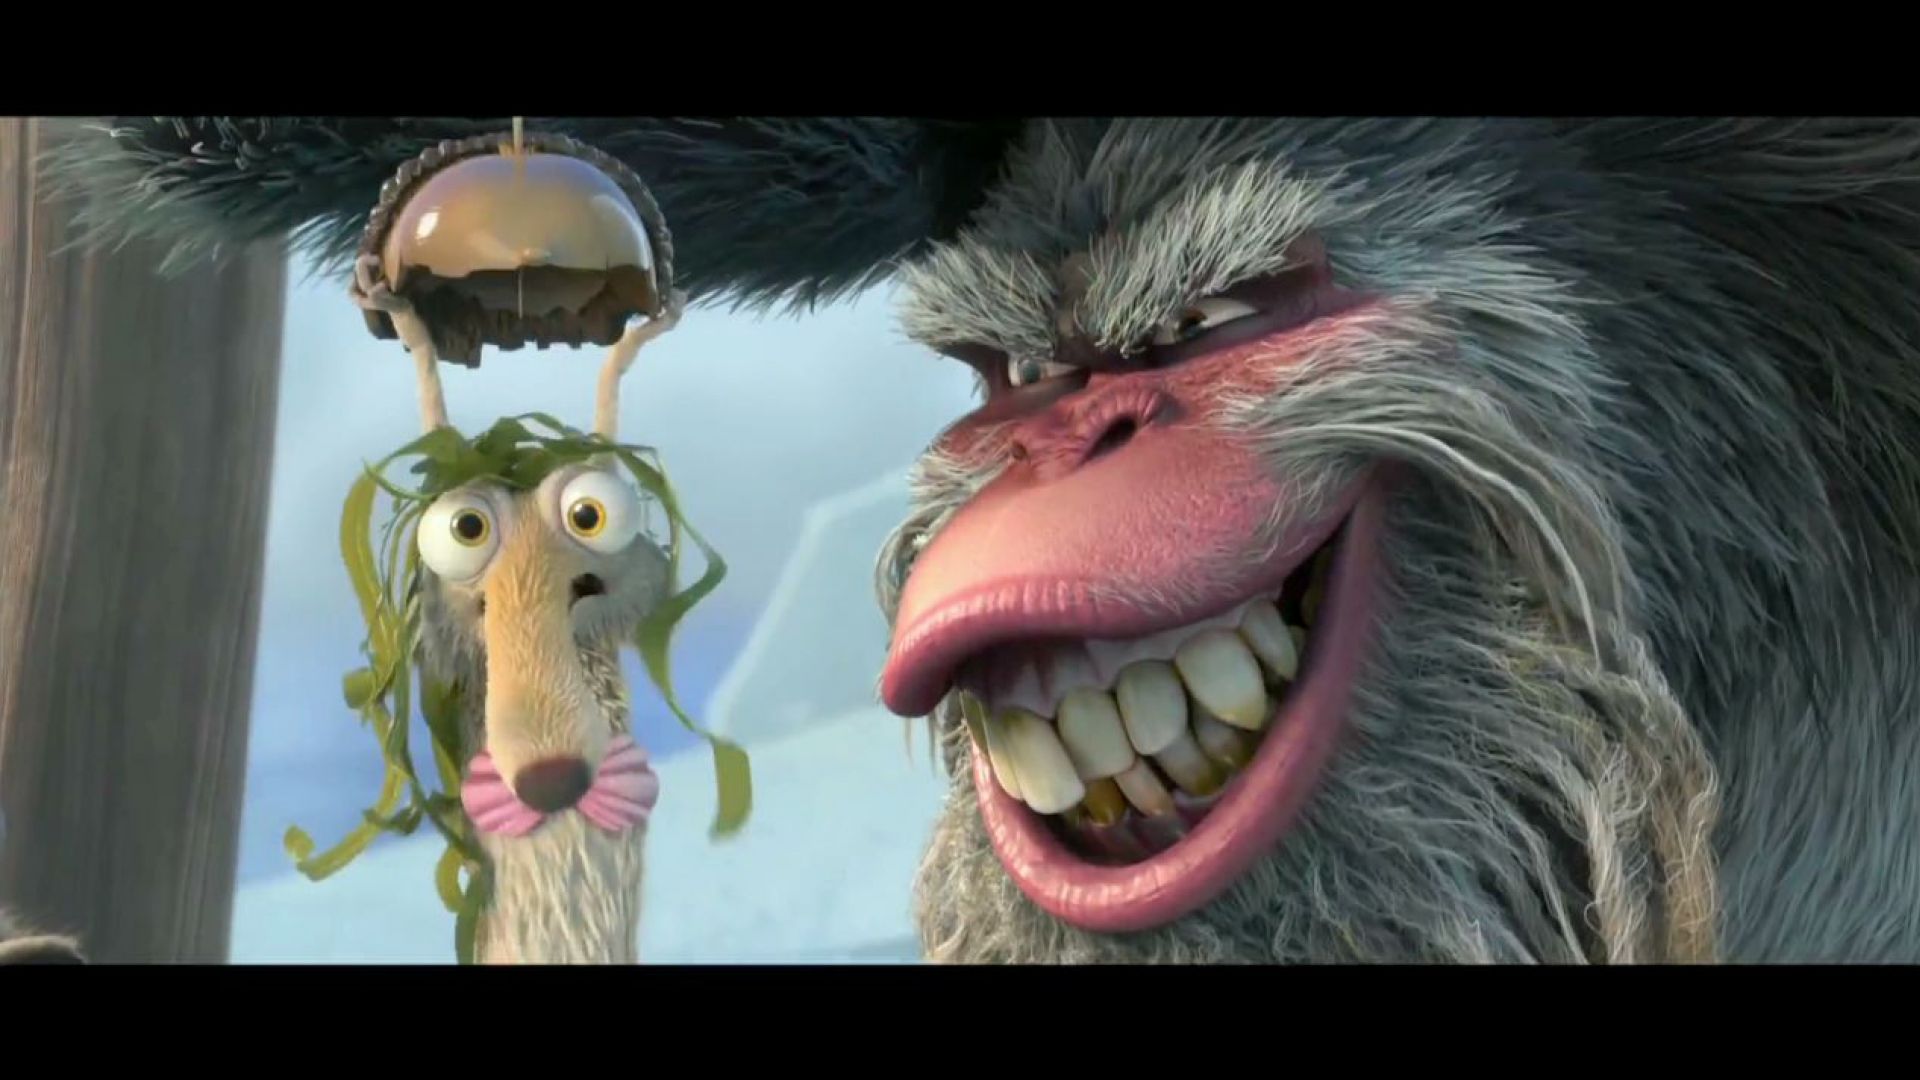 Scrat finds nut in water. Ice Age 4